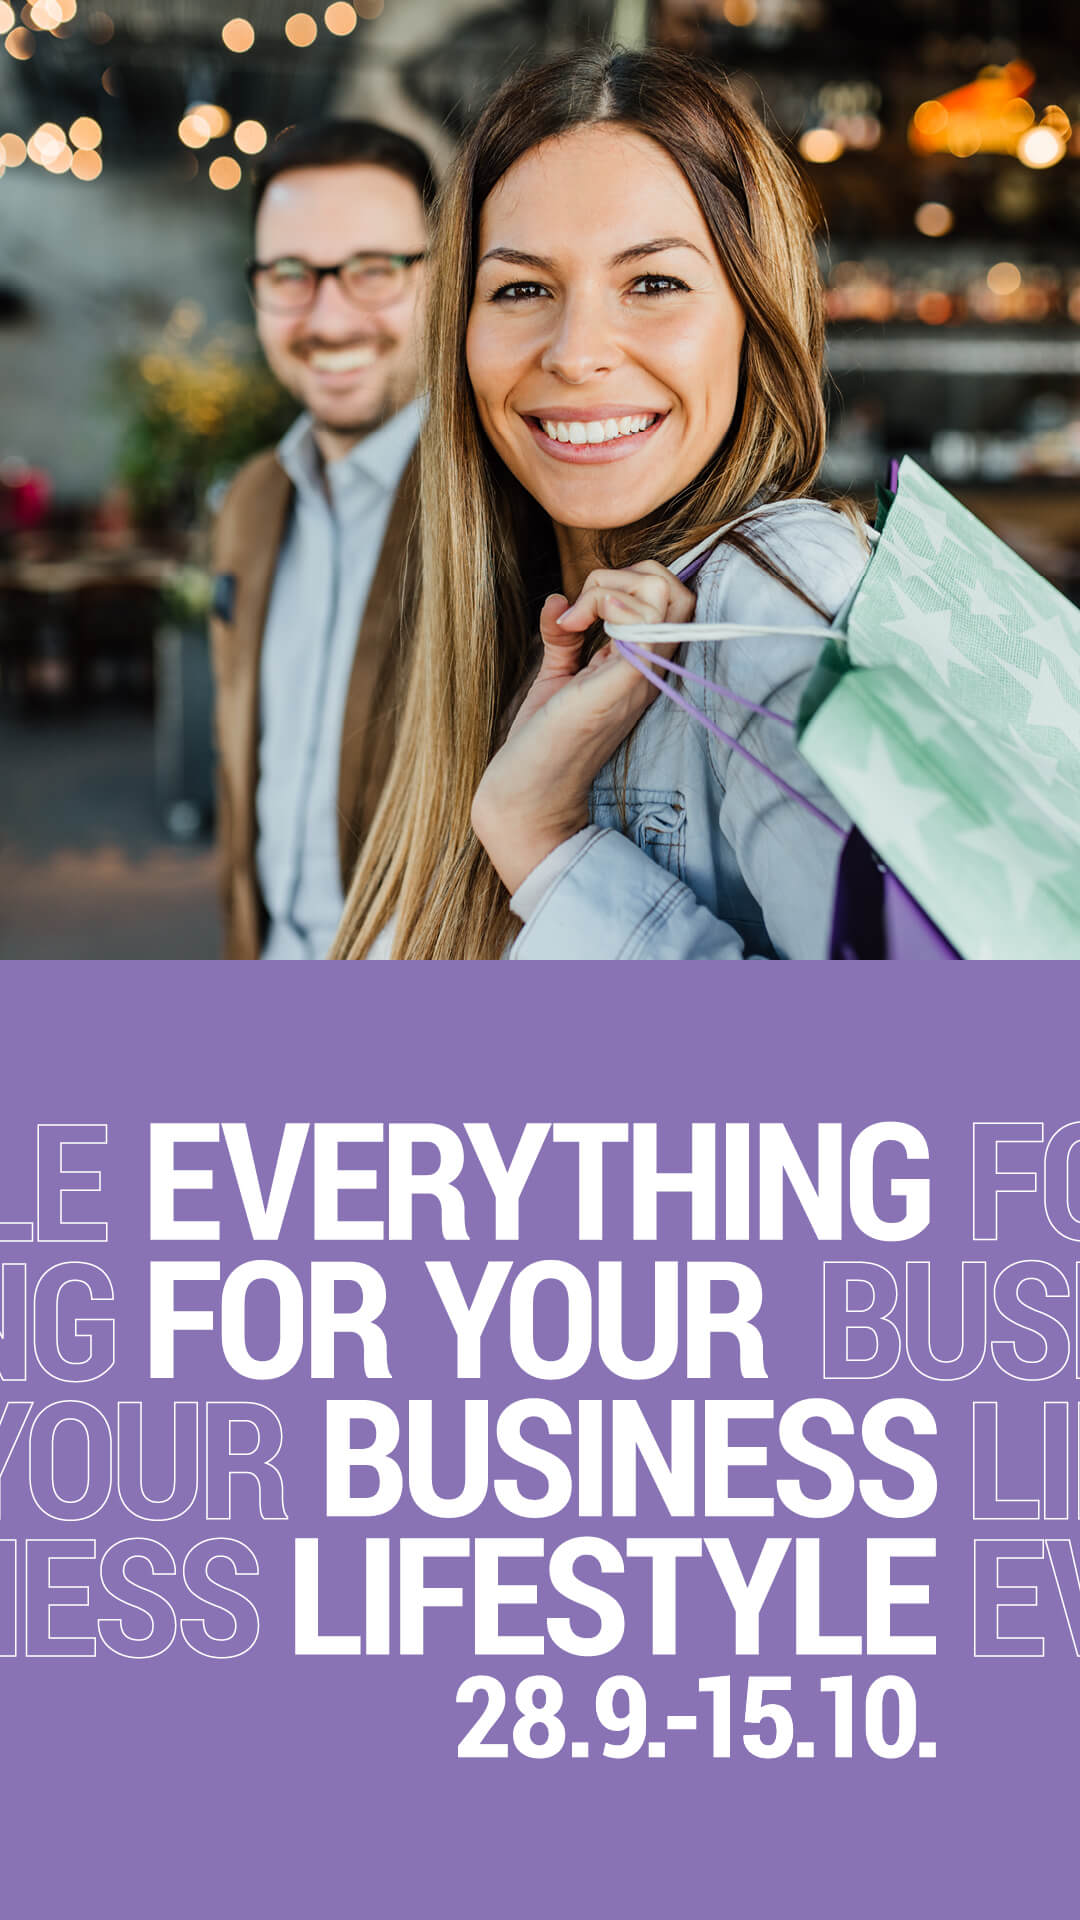 Everything for your business lifestyle at East Gate Mall